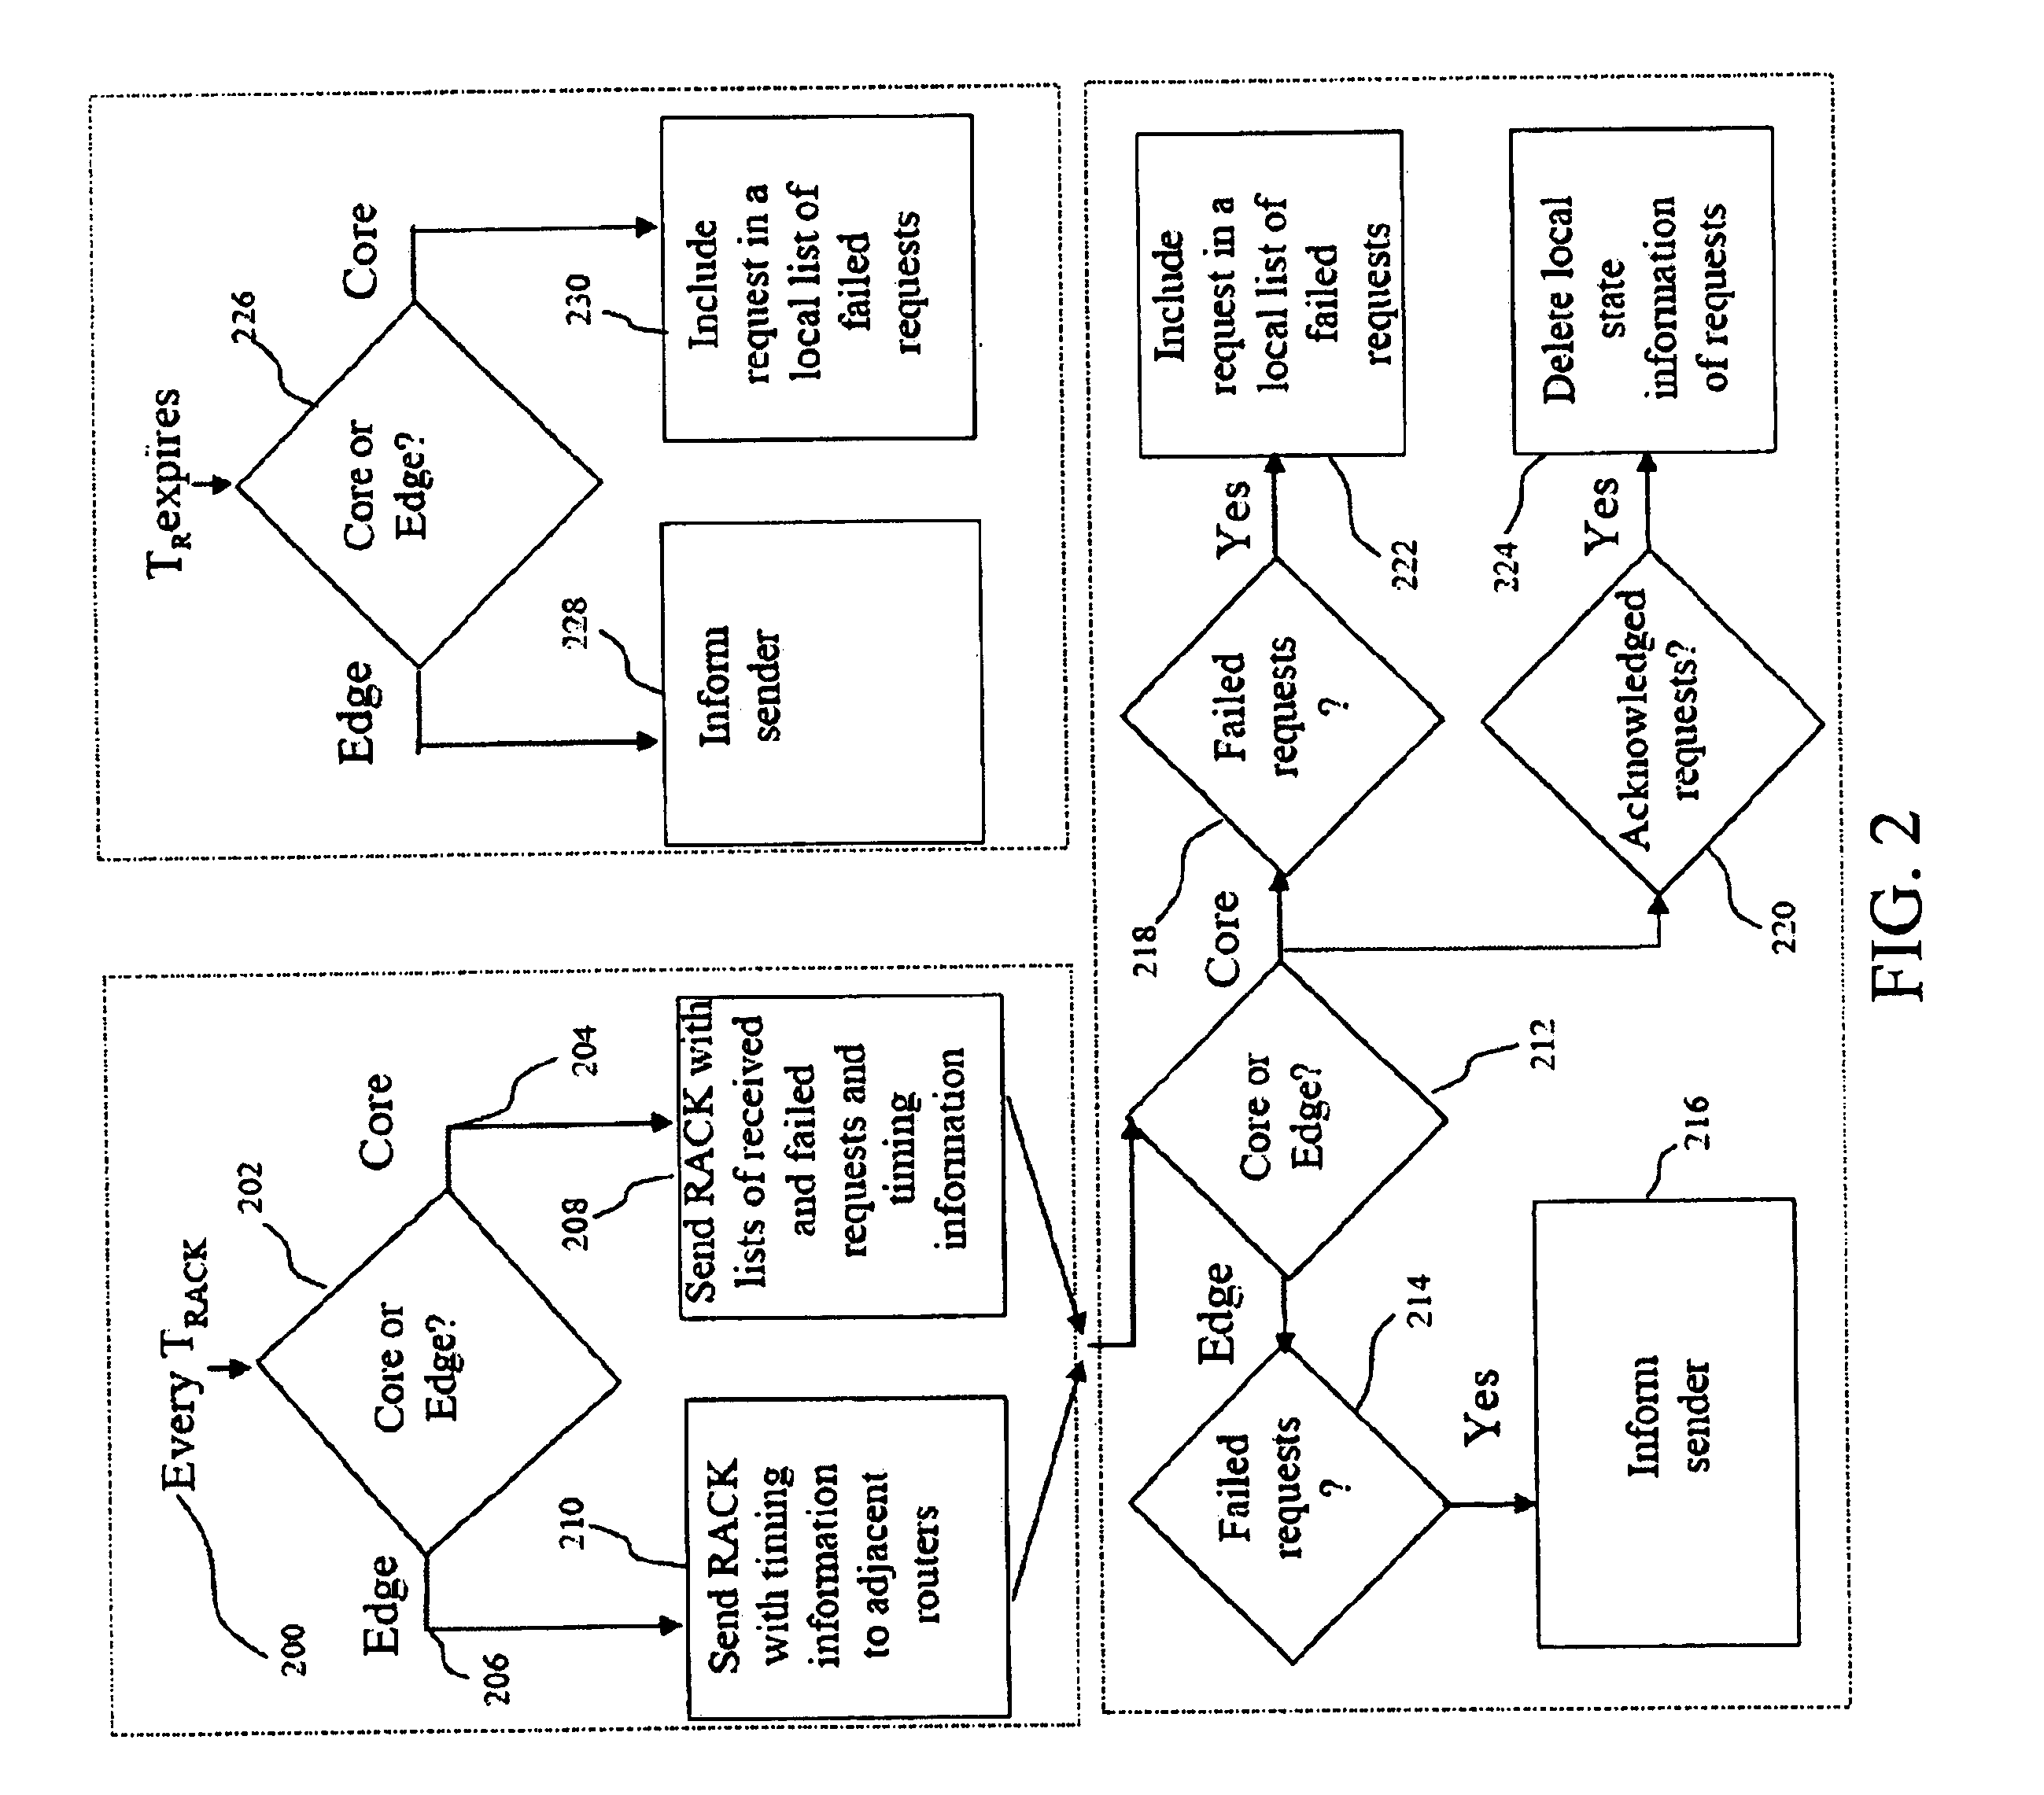 System for pricing-based quality of service (PQoS) control in networks